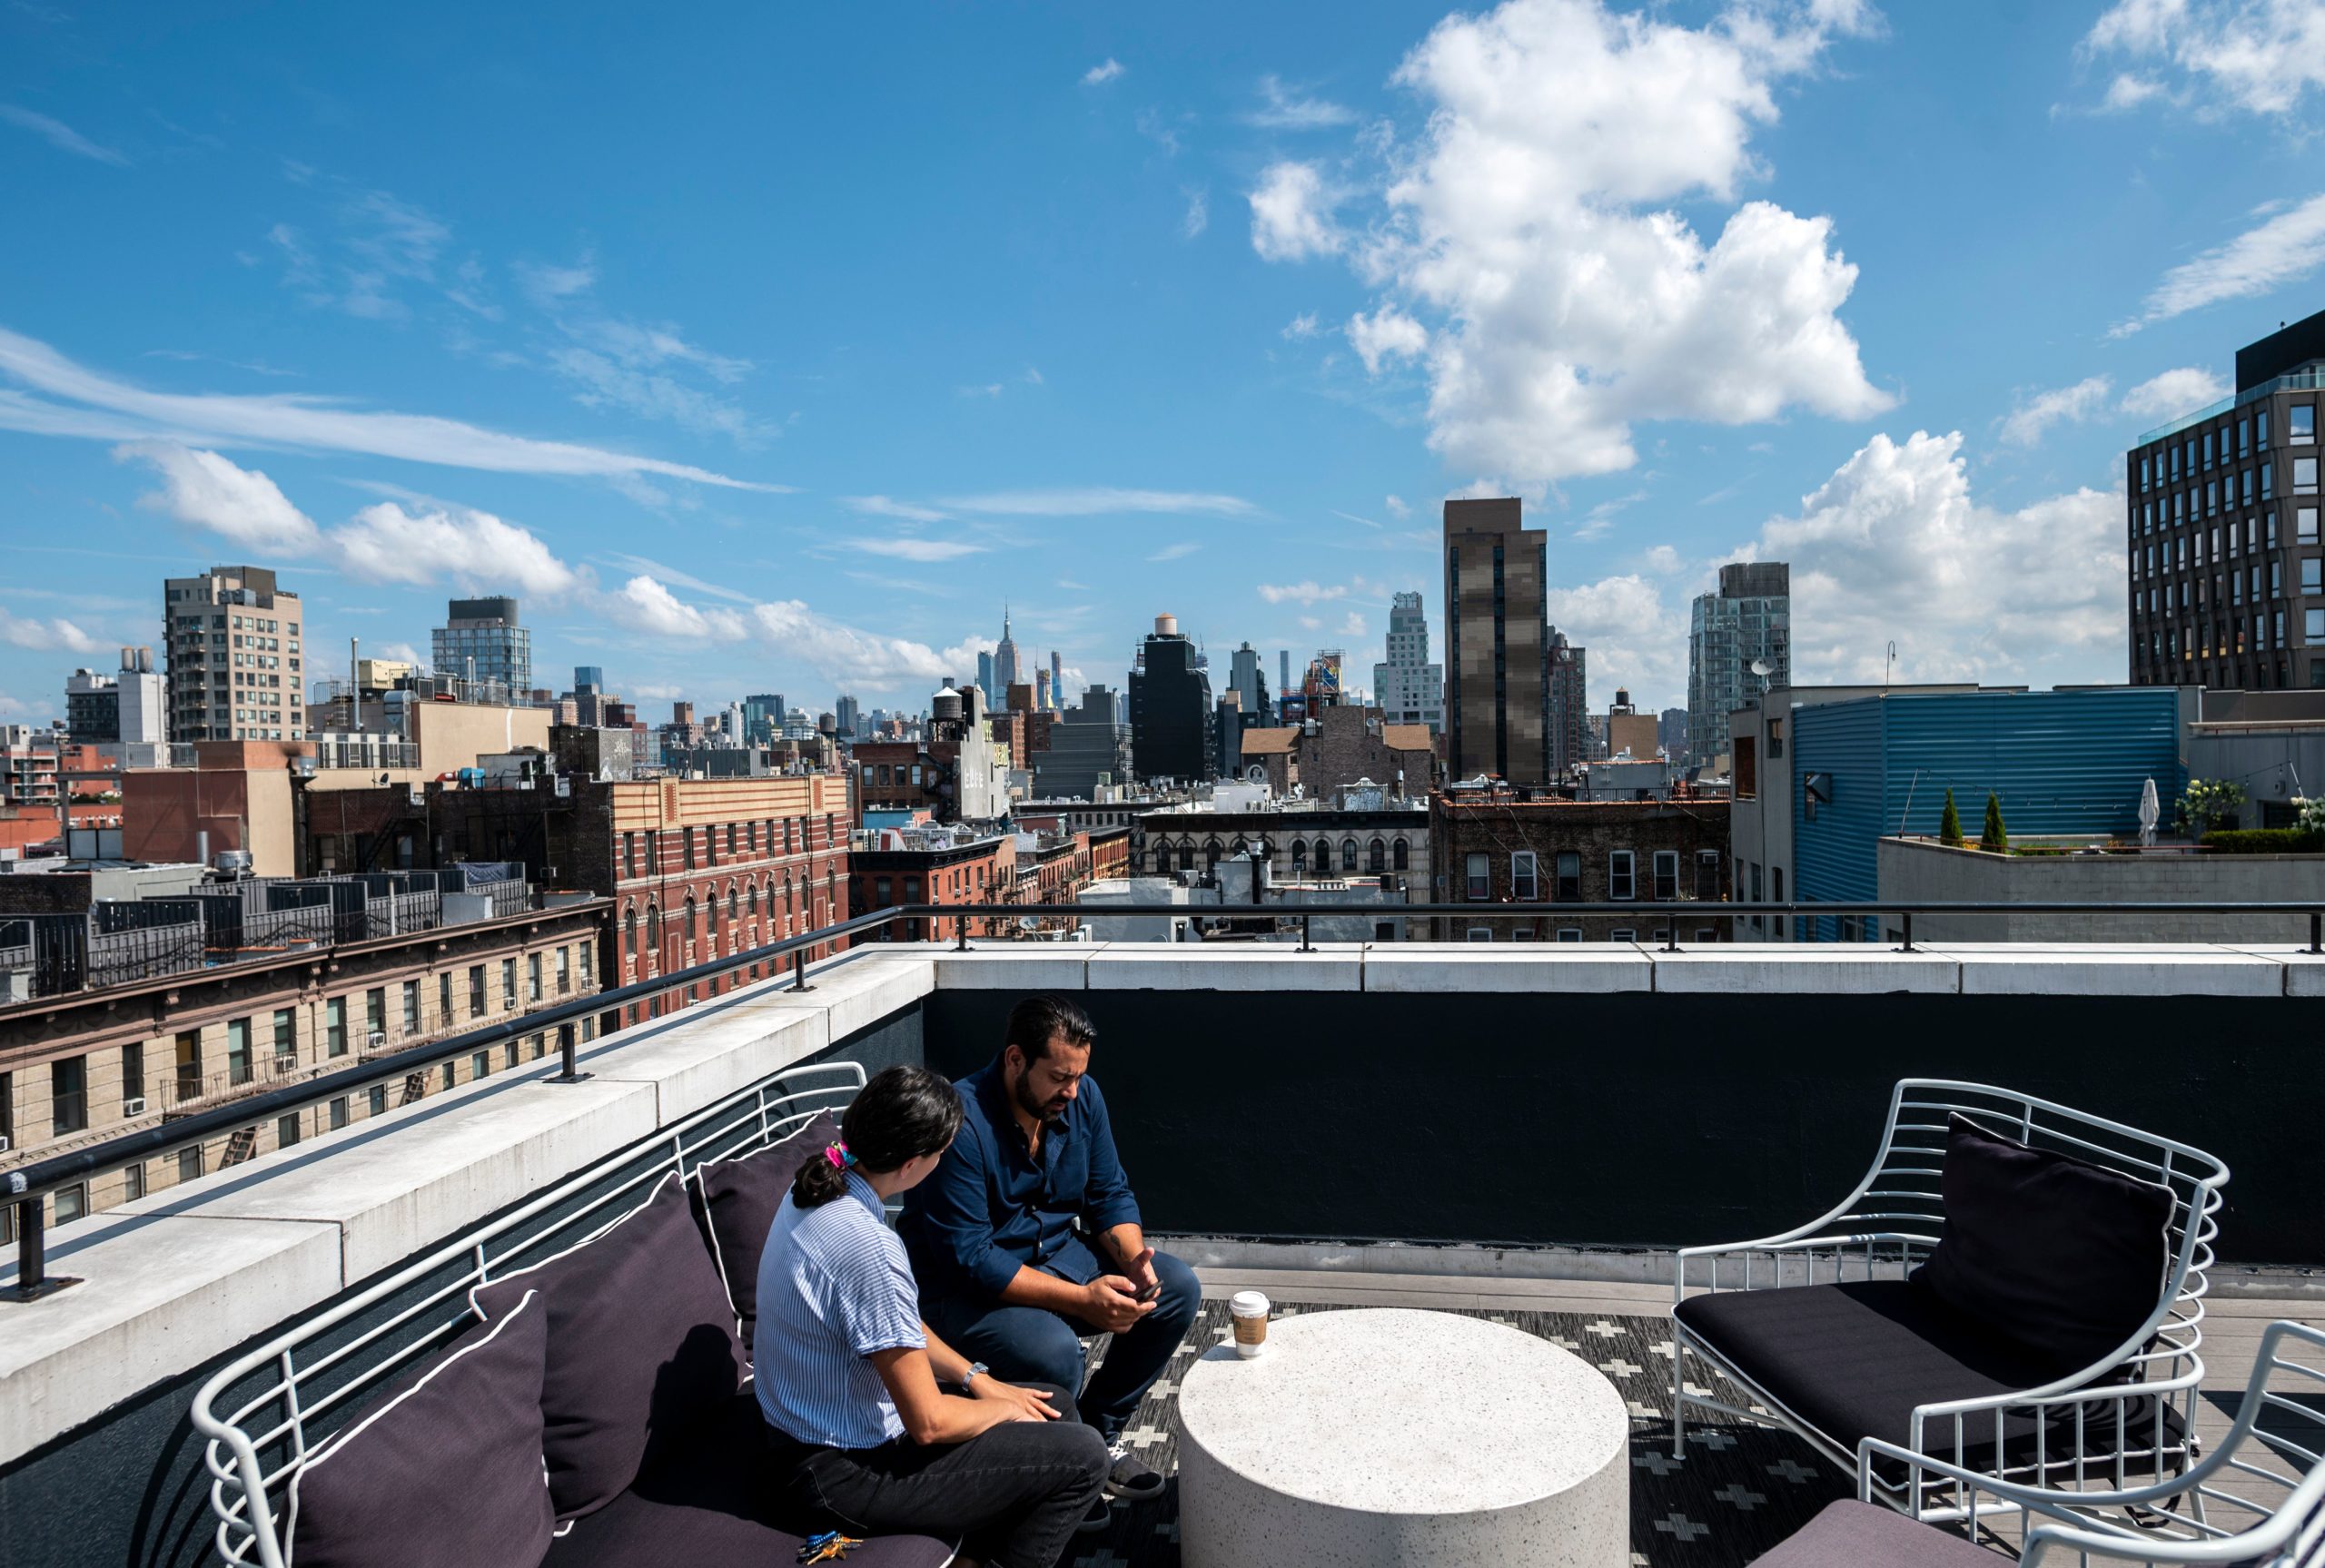 Gil Hirak (R), head of US operations and community of Quarters speaks with a colleague on the roof top of Quarters Co-Living in the Lower East Side on July 24, 2019 in New York City. - Nandita Iyer landed in New York from Bombay without knowing anyone, but she didn't want to live alone in a "sketchy studio." So instead she opted for a room in a "coliving" unit. She lives with roommates in one of the 14 apartments in a small building run by the housing start-up Quarters in the trendy Lower East Side neighborhood. The best part of the arrangement, she said, are the common areas: a large kitchen with a big table and comfy couches, a terrace where she can work and a luxurious rooftop patio. "I met people from such different backgrounds. And I became very good friends with them," she said. (Photo by Johannes EISELE / AFP) (Photo by JOHANNES EISELE/AFP via Getty Images)